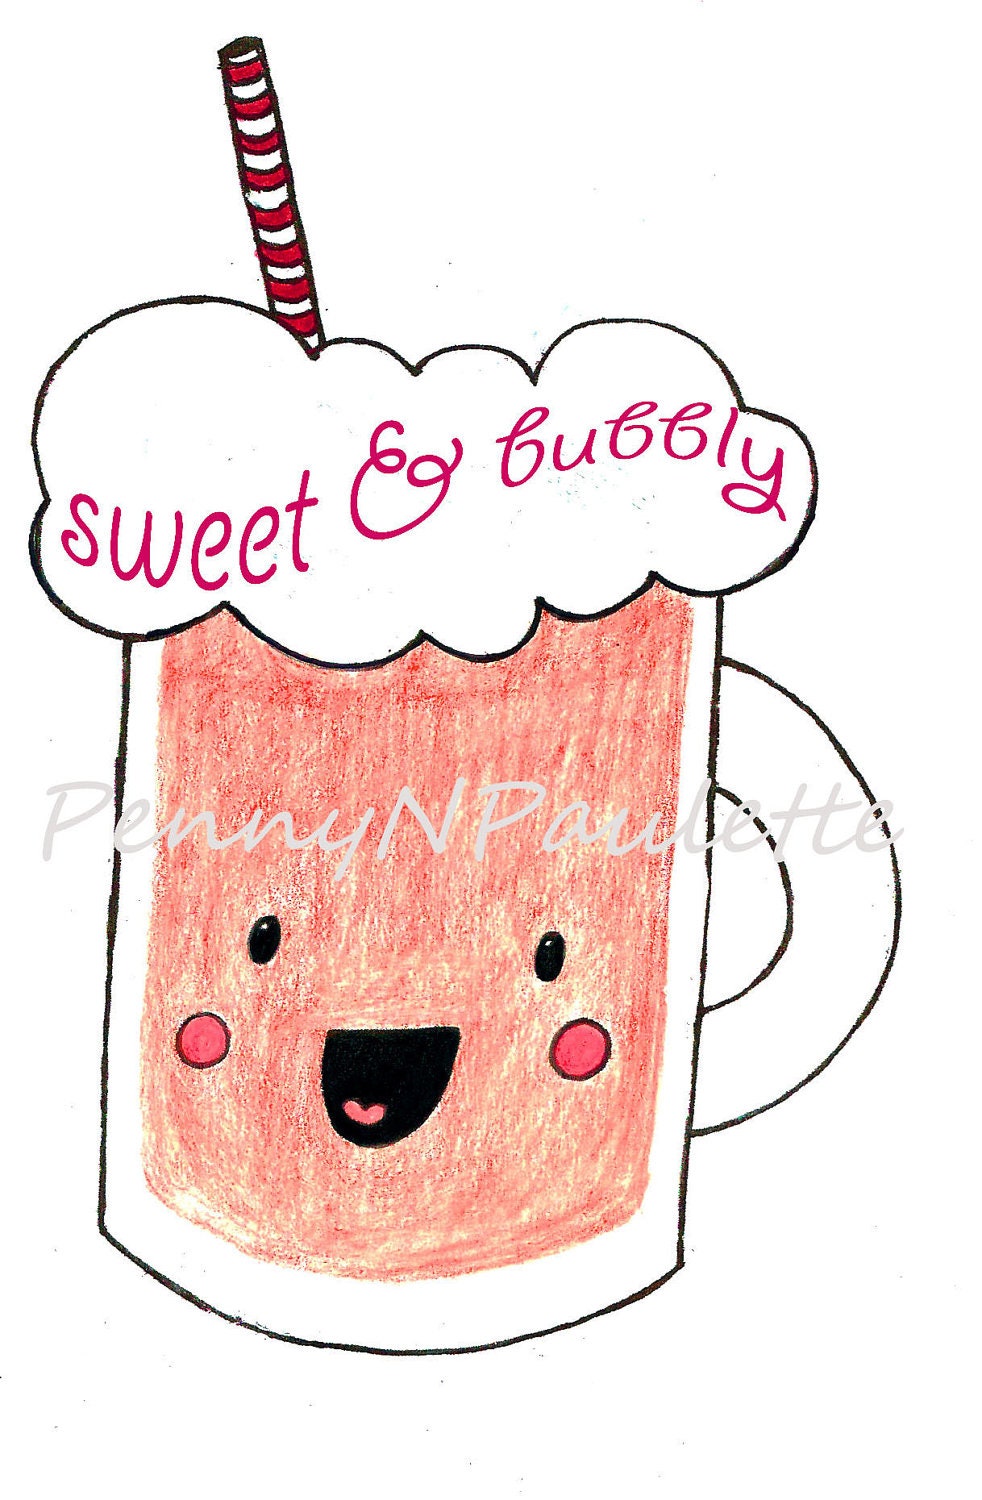 childrens babies "Sweet & Bubbly" root beer float printed tshirt custom made to order sizes 0-5T OOAK original hand drawn designs